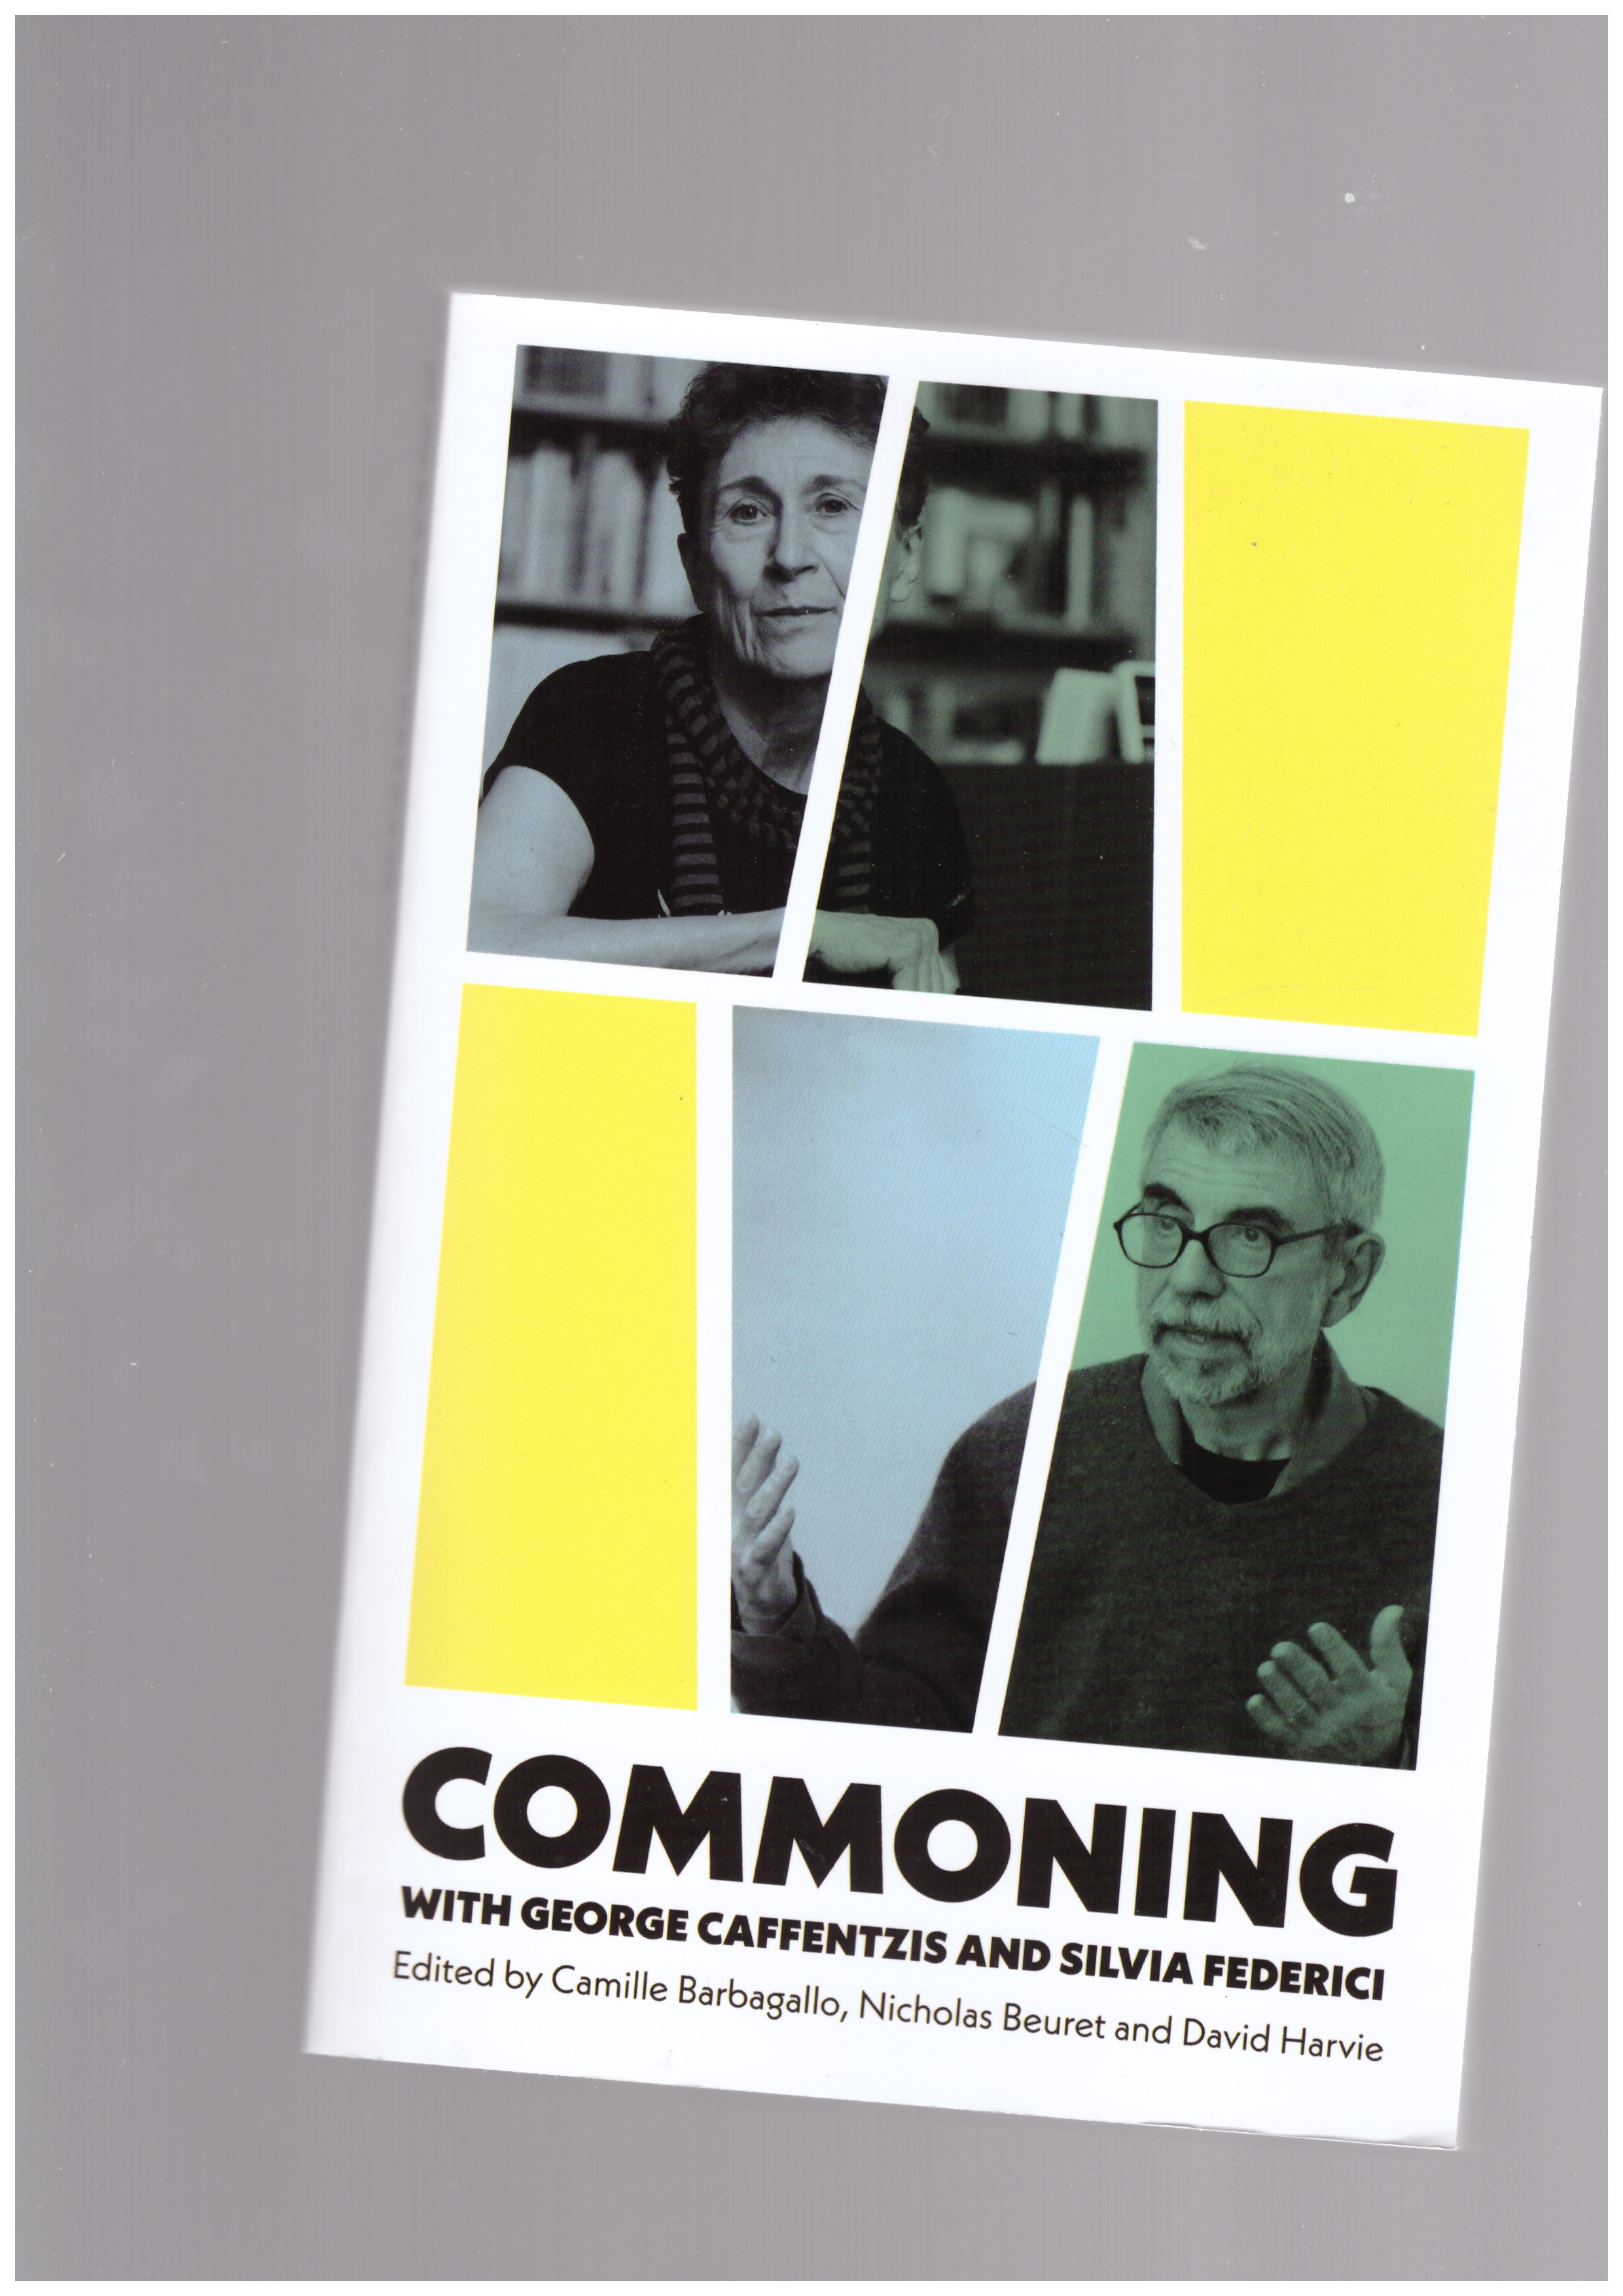 BARBAGALLO, Camille; BEURET, Nicholas; HARVIE, David (eds.) - Commoning with George Caffentzis and Silvia Federici